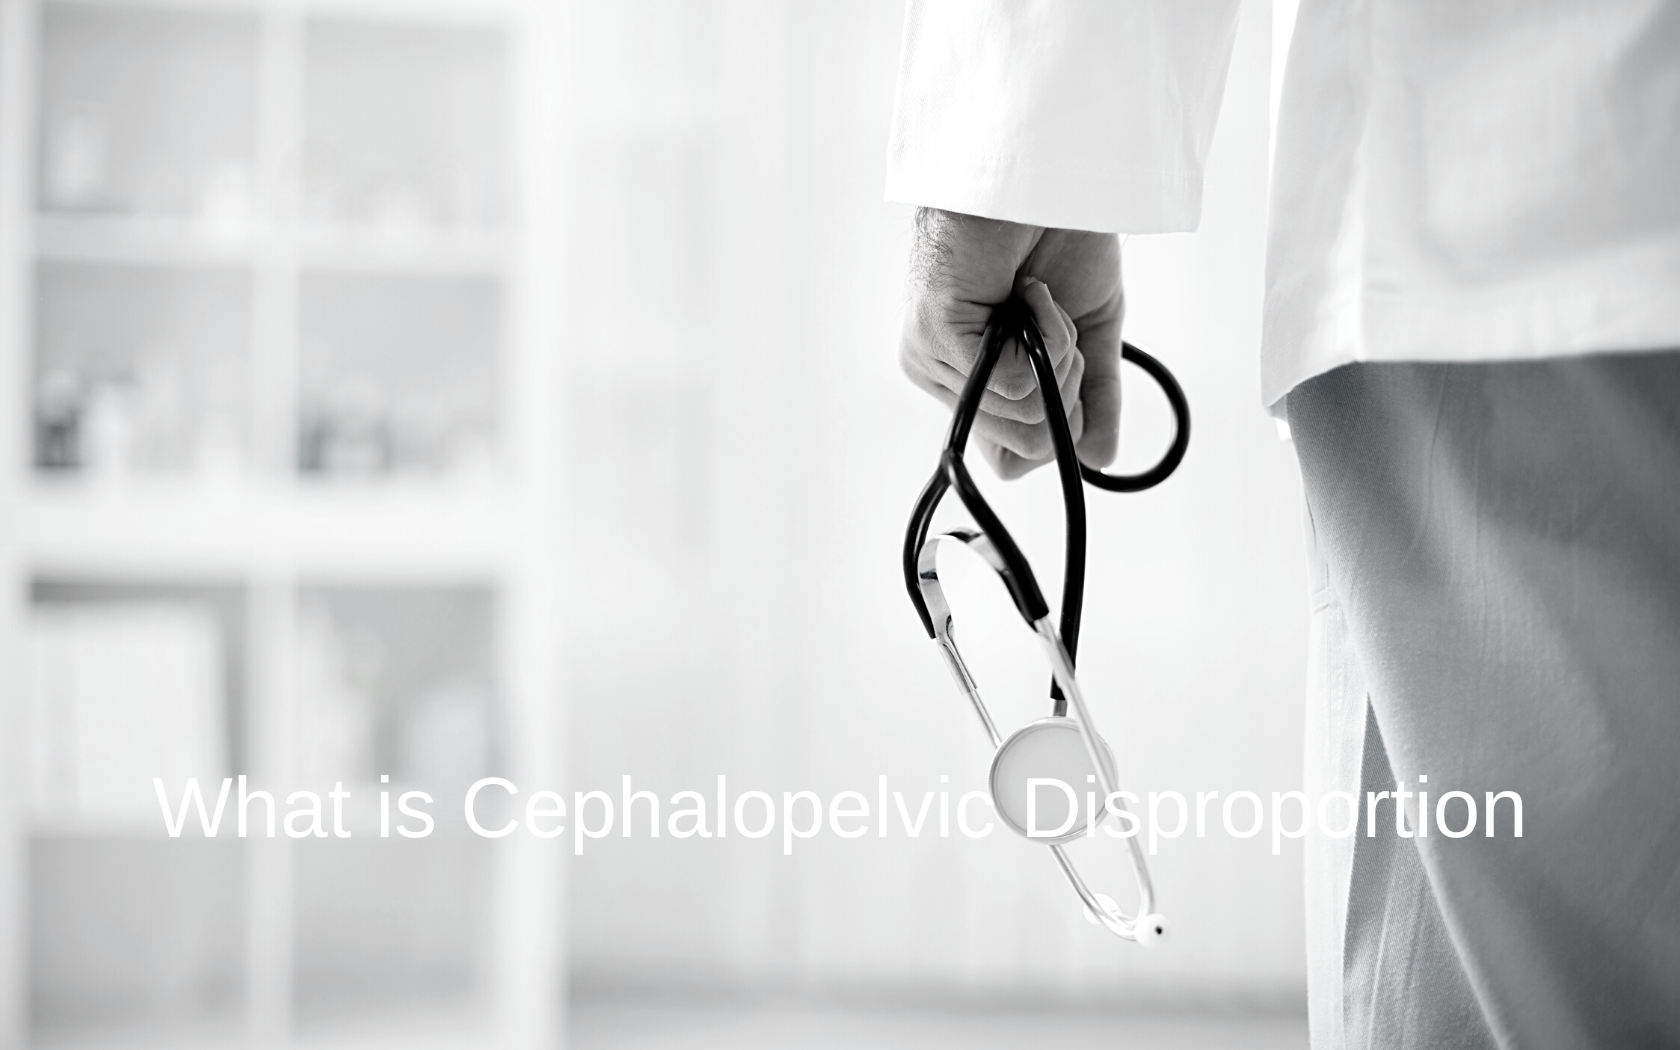 Doctor misses cephalopelvic disproportion during pregnancy.